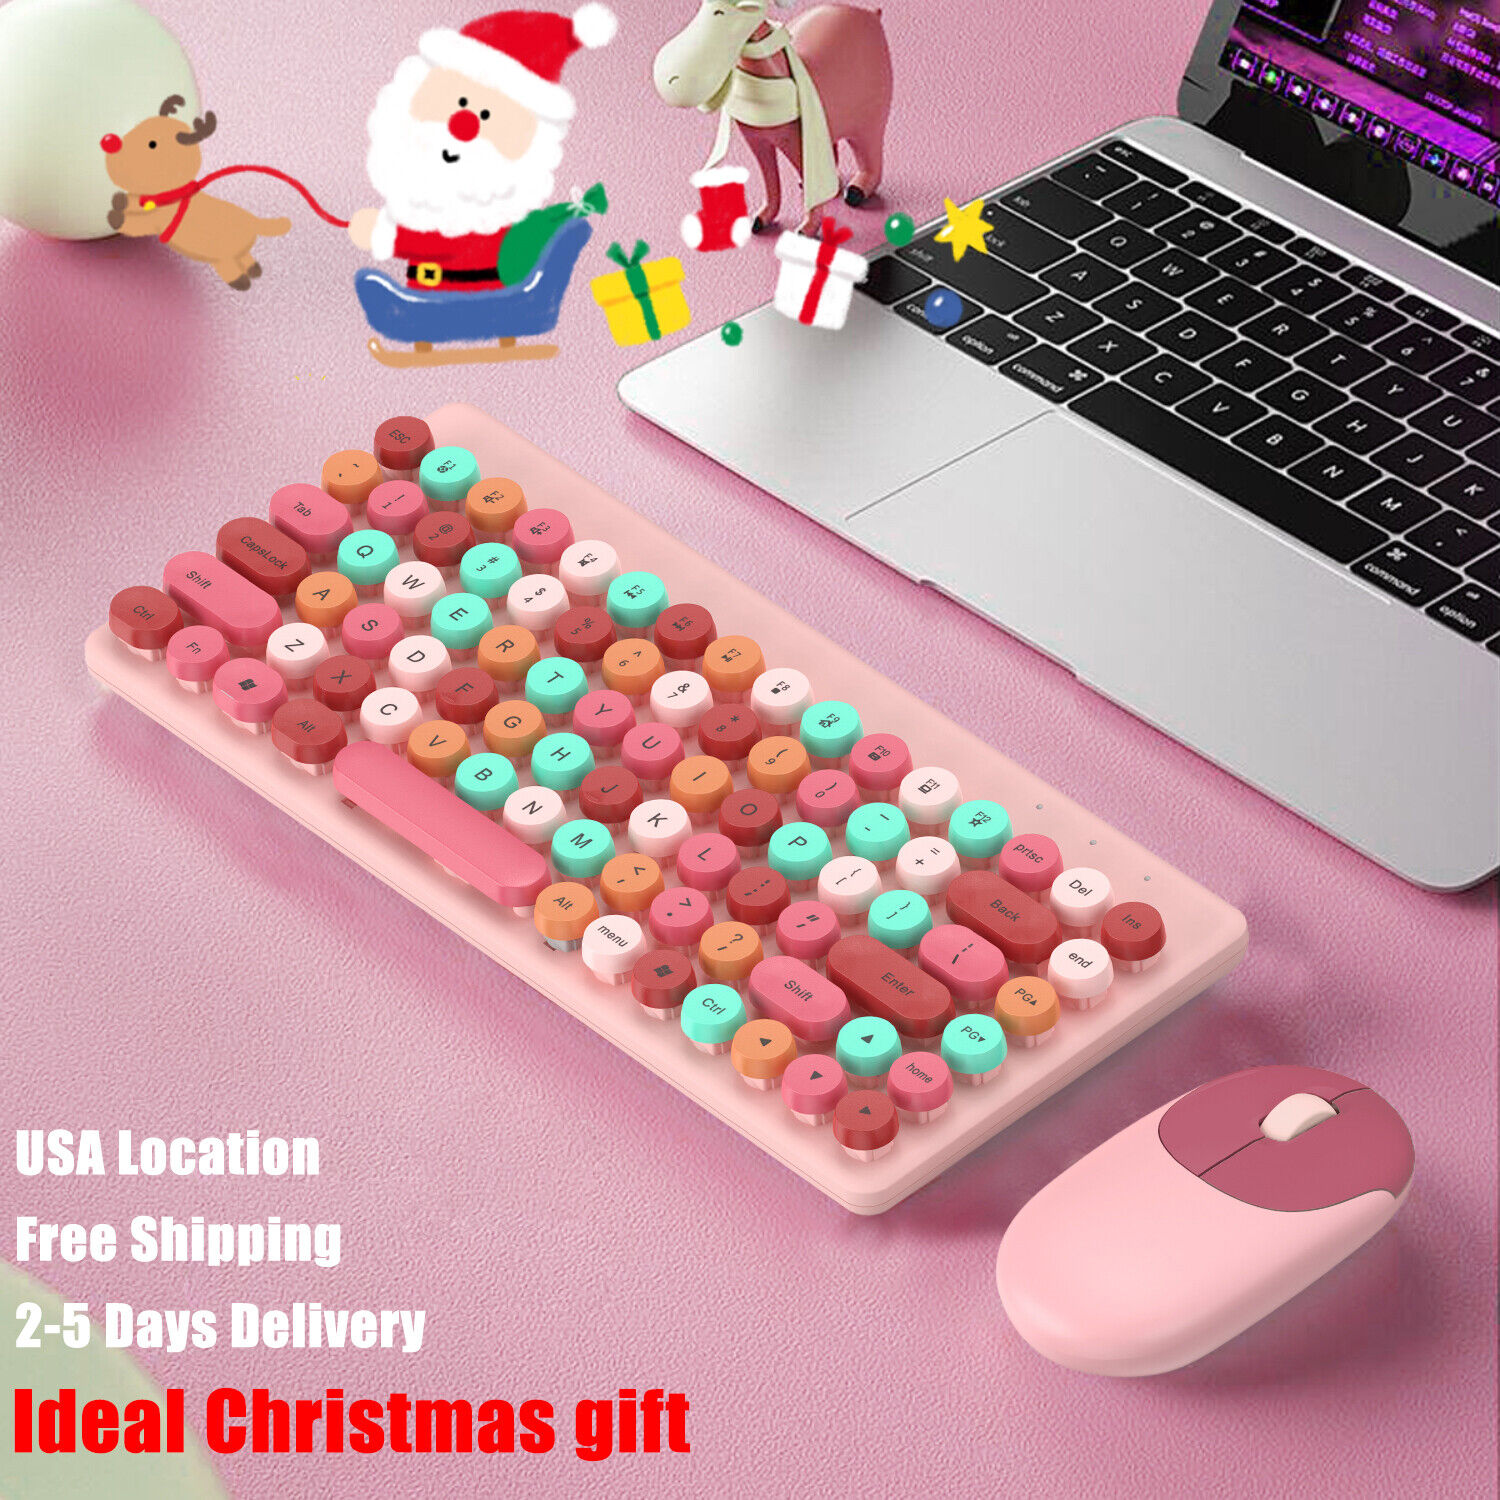 Wireless Keyboard & Mouse Sets Compact Cute Bluetooth Keyboards for PC Mac Gamer